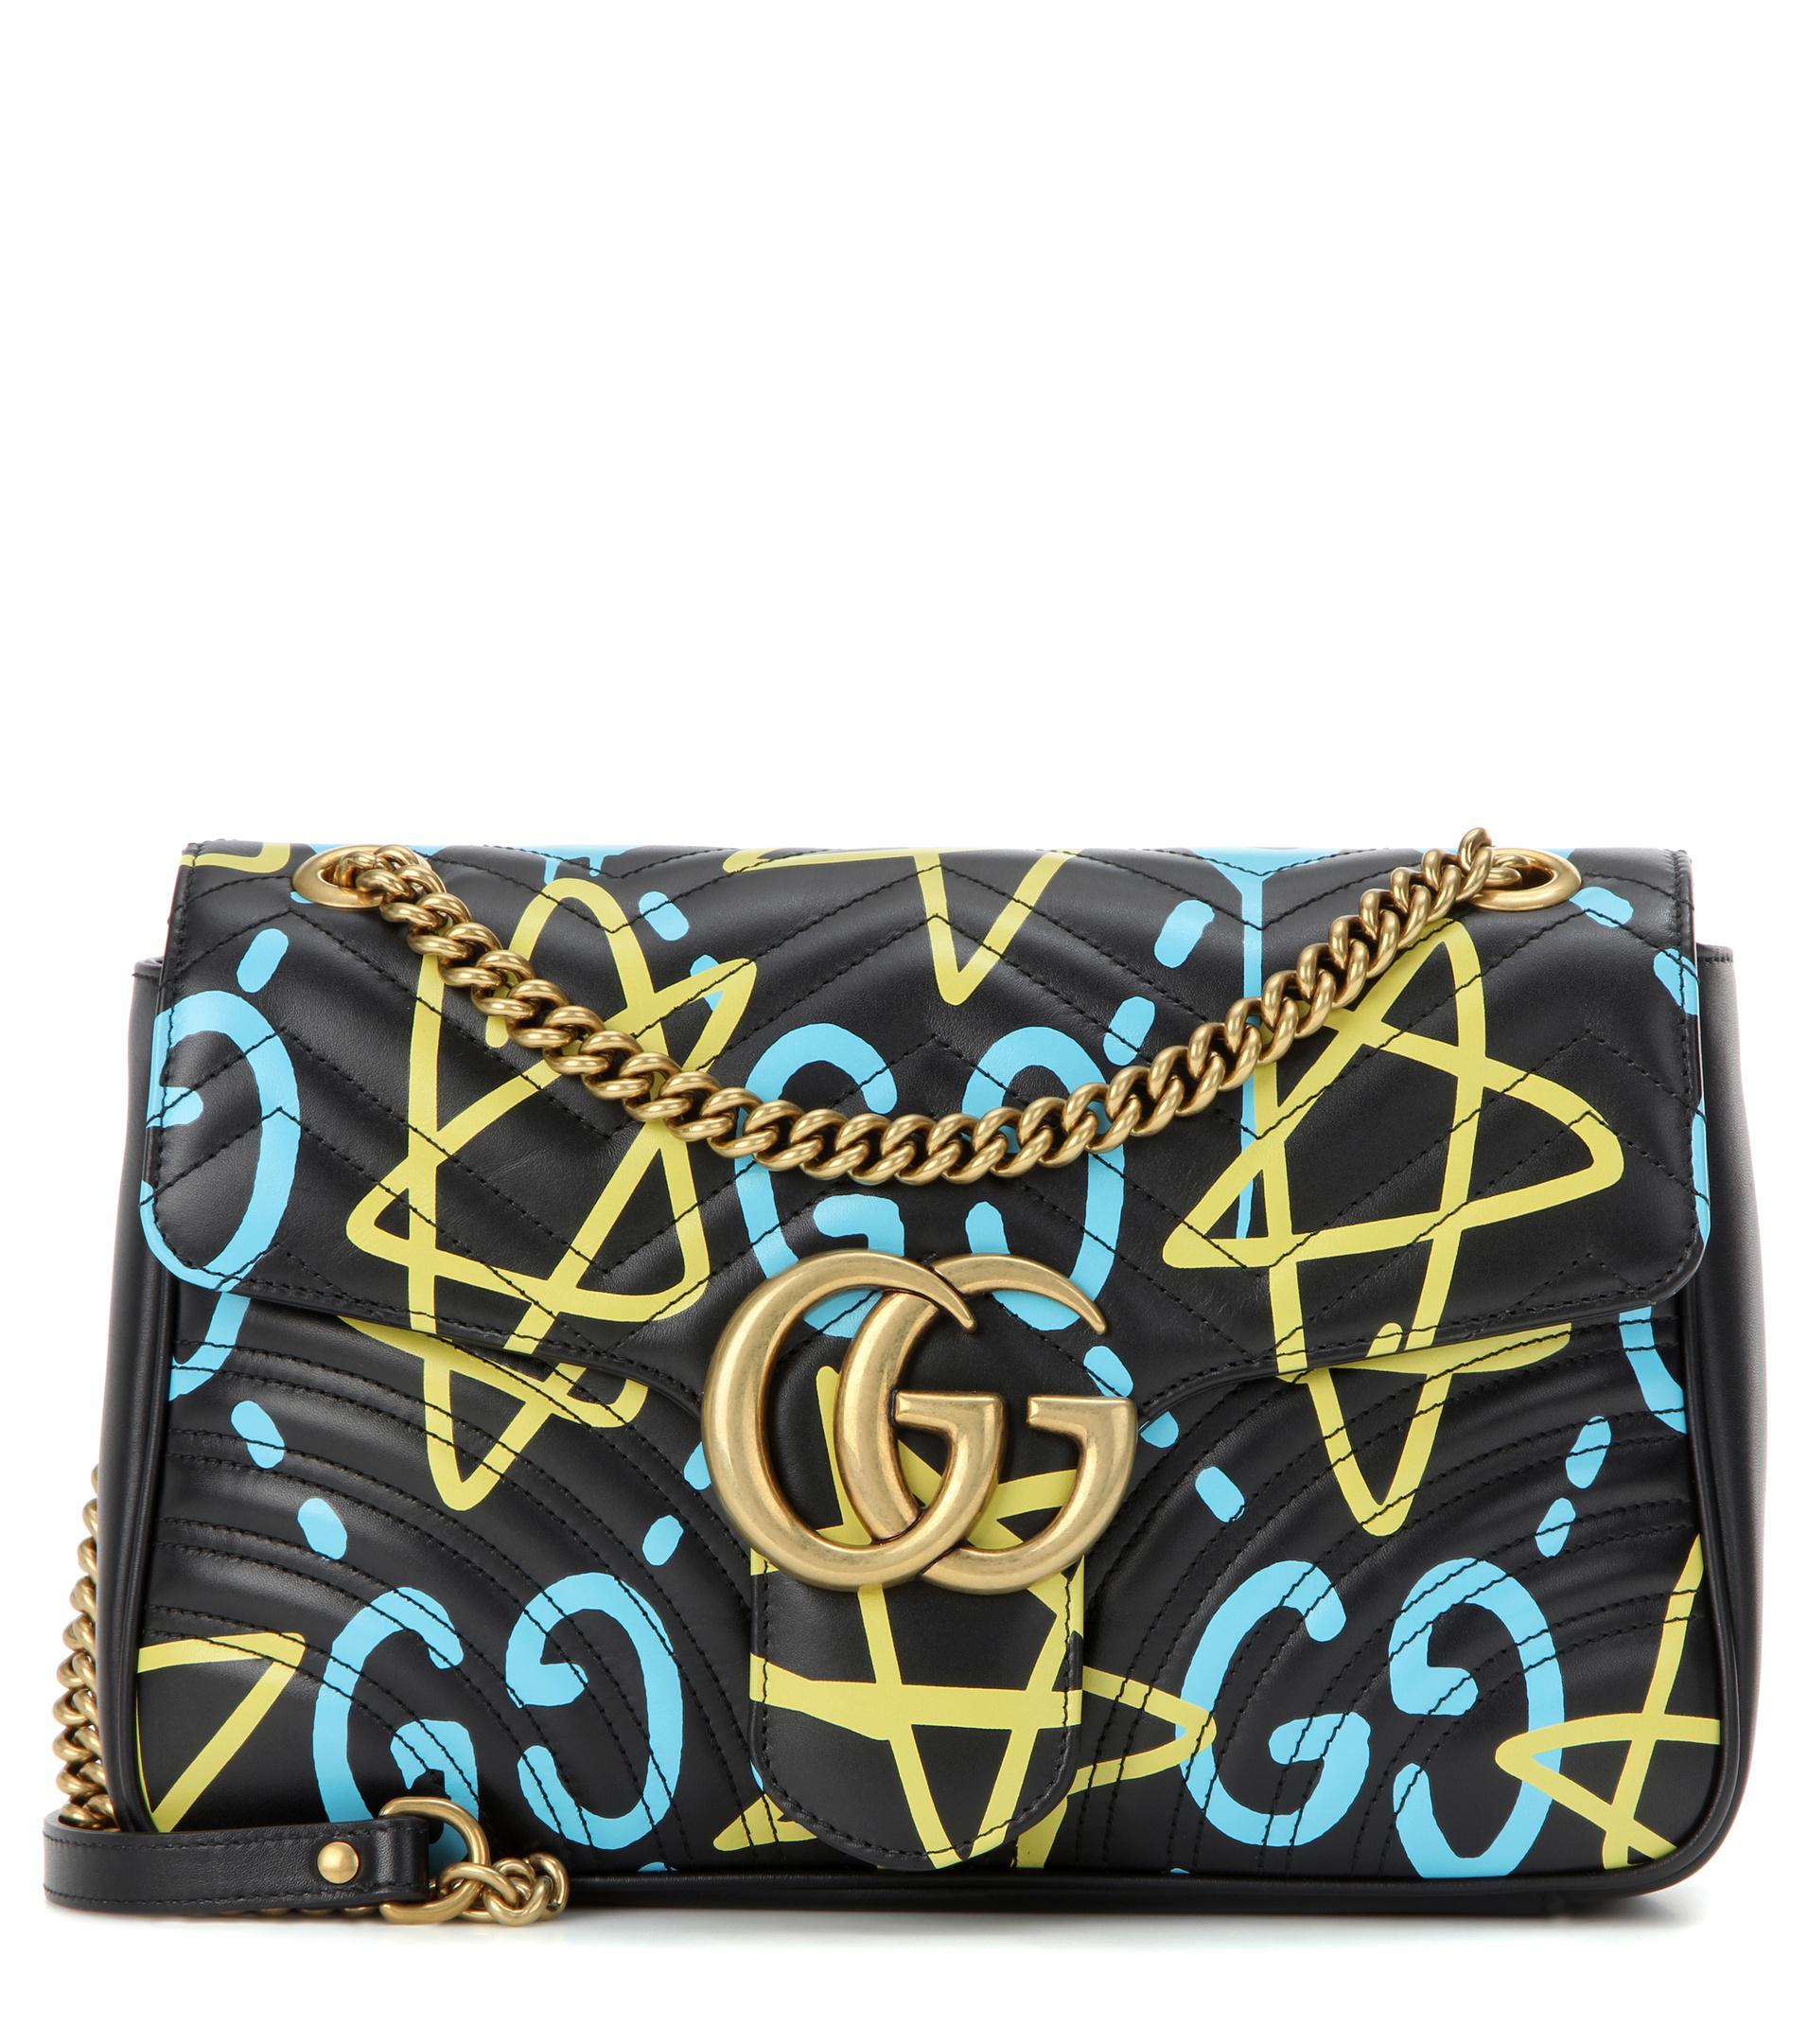 Gucci Ghost Gg Marmont Medium Leather Shoulder Bag in Black | Lyst